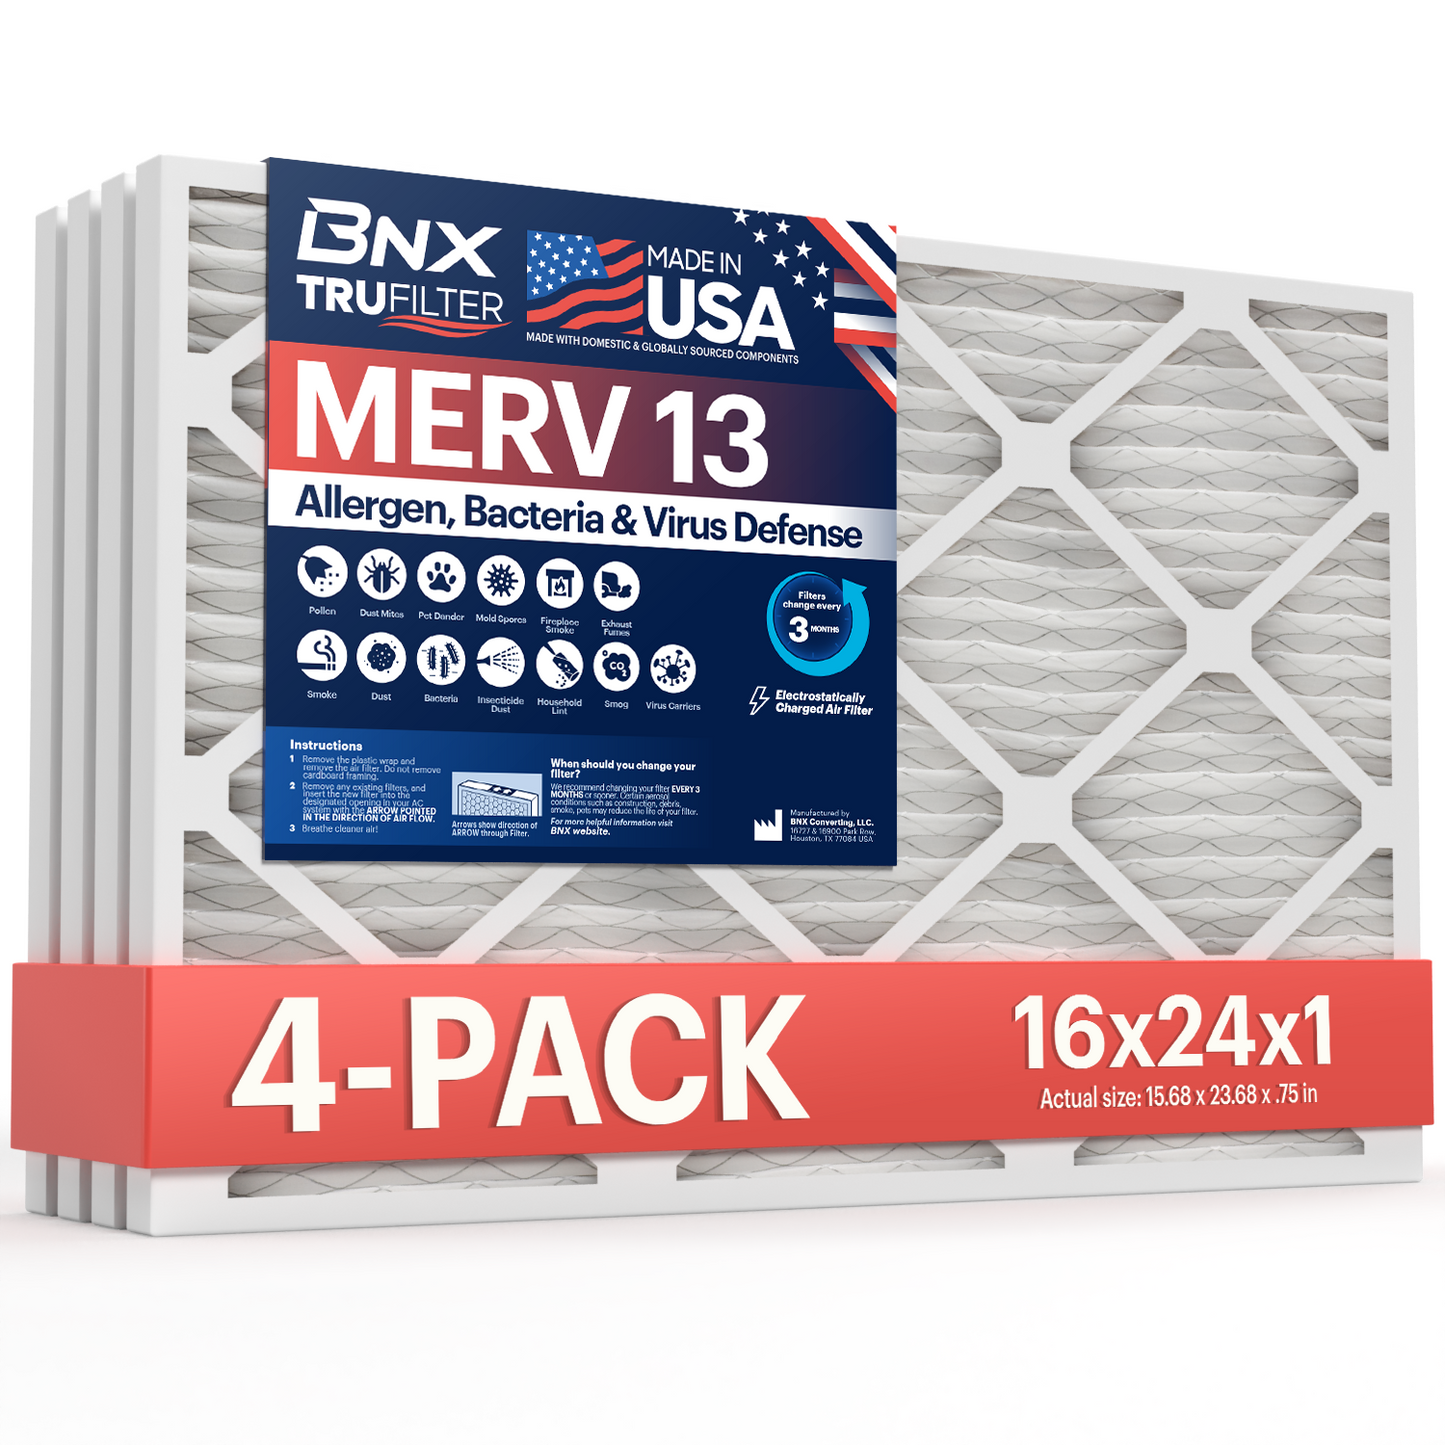 BNX TruFilter 16x24x1 MERV 13 Pleated Air Filter – Made in USA (4-Pack)